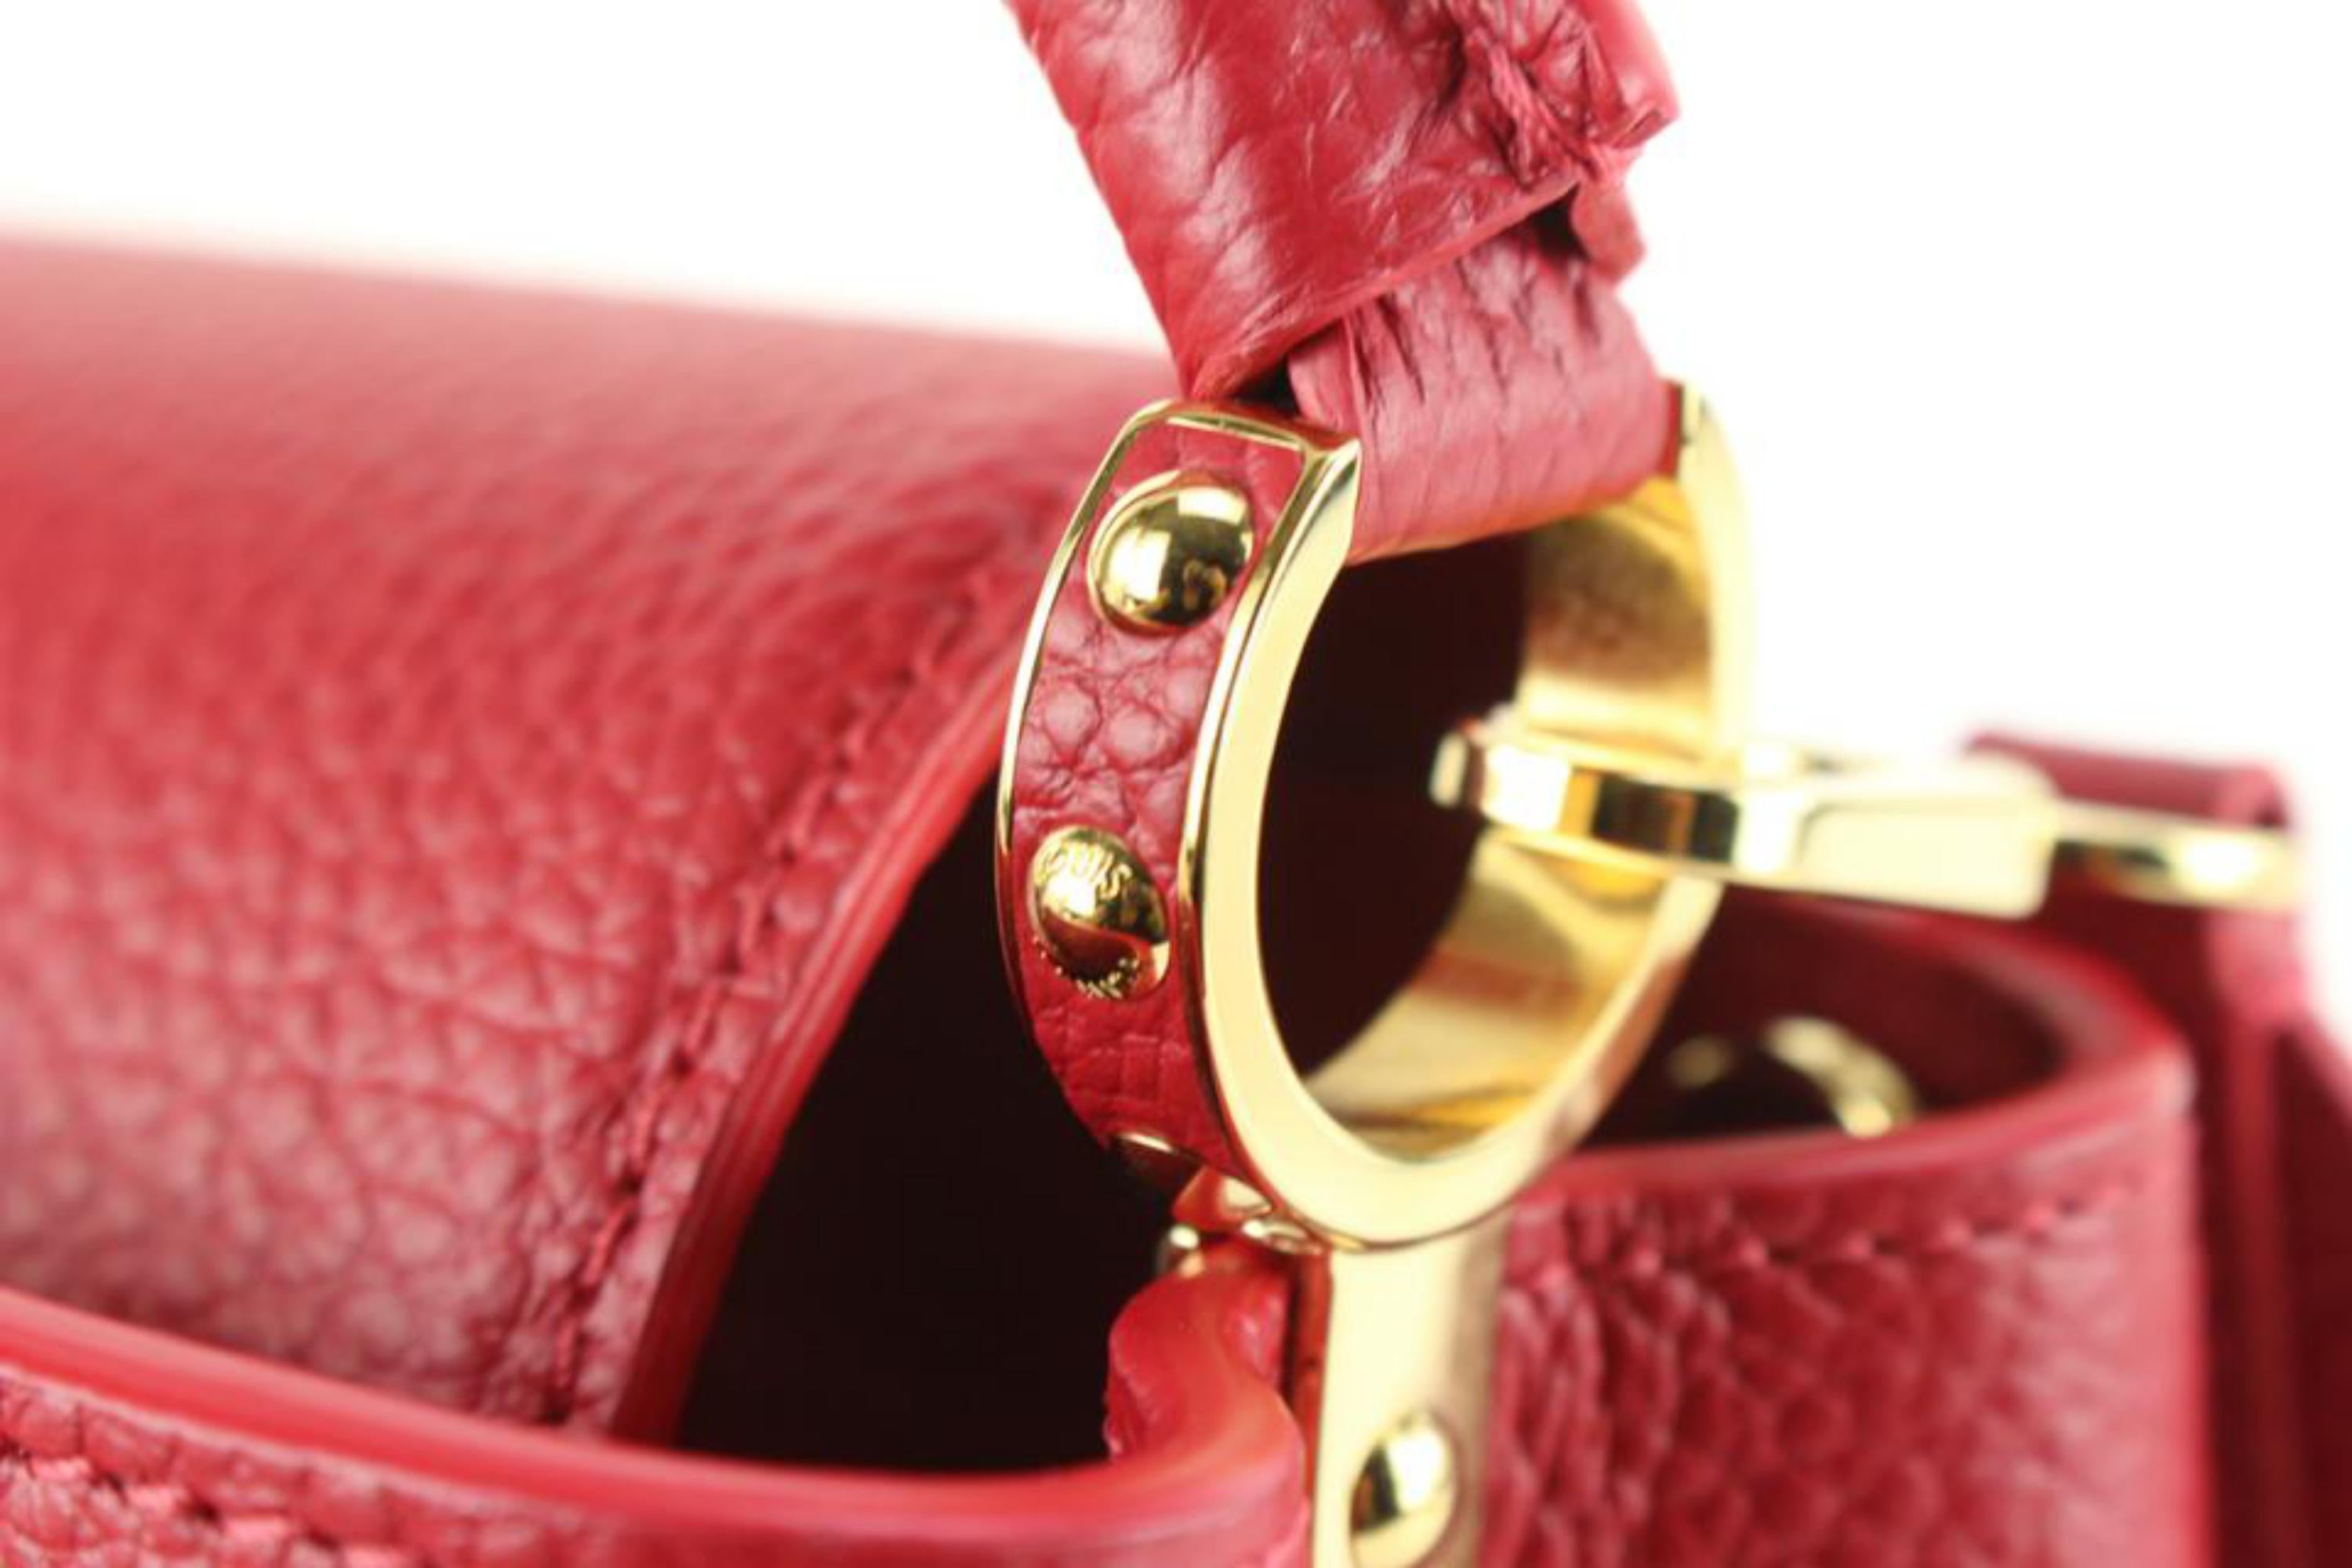 Capucines leather handbag Louis Vuitton Red in Leather - 37236775